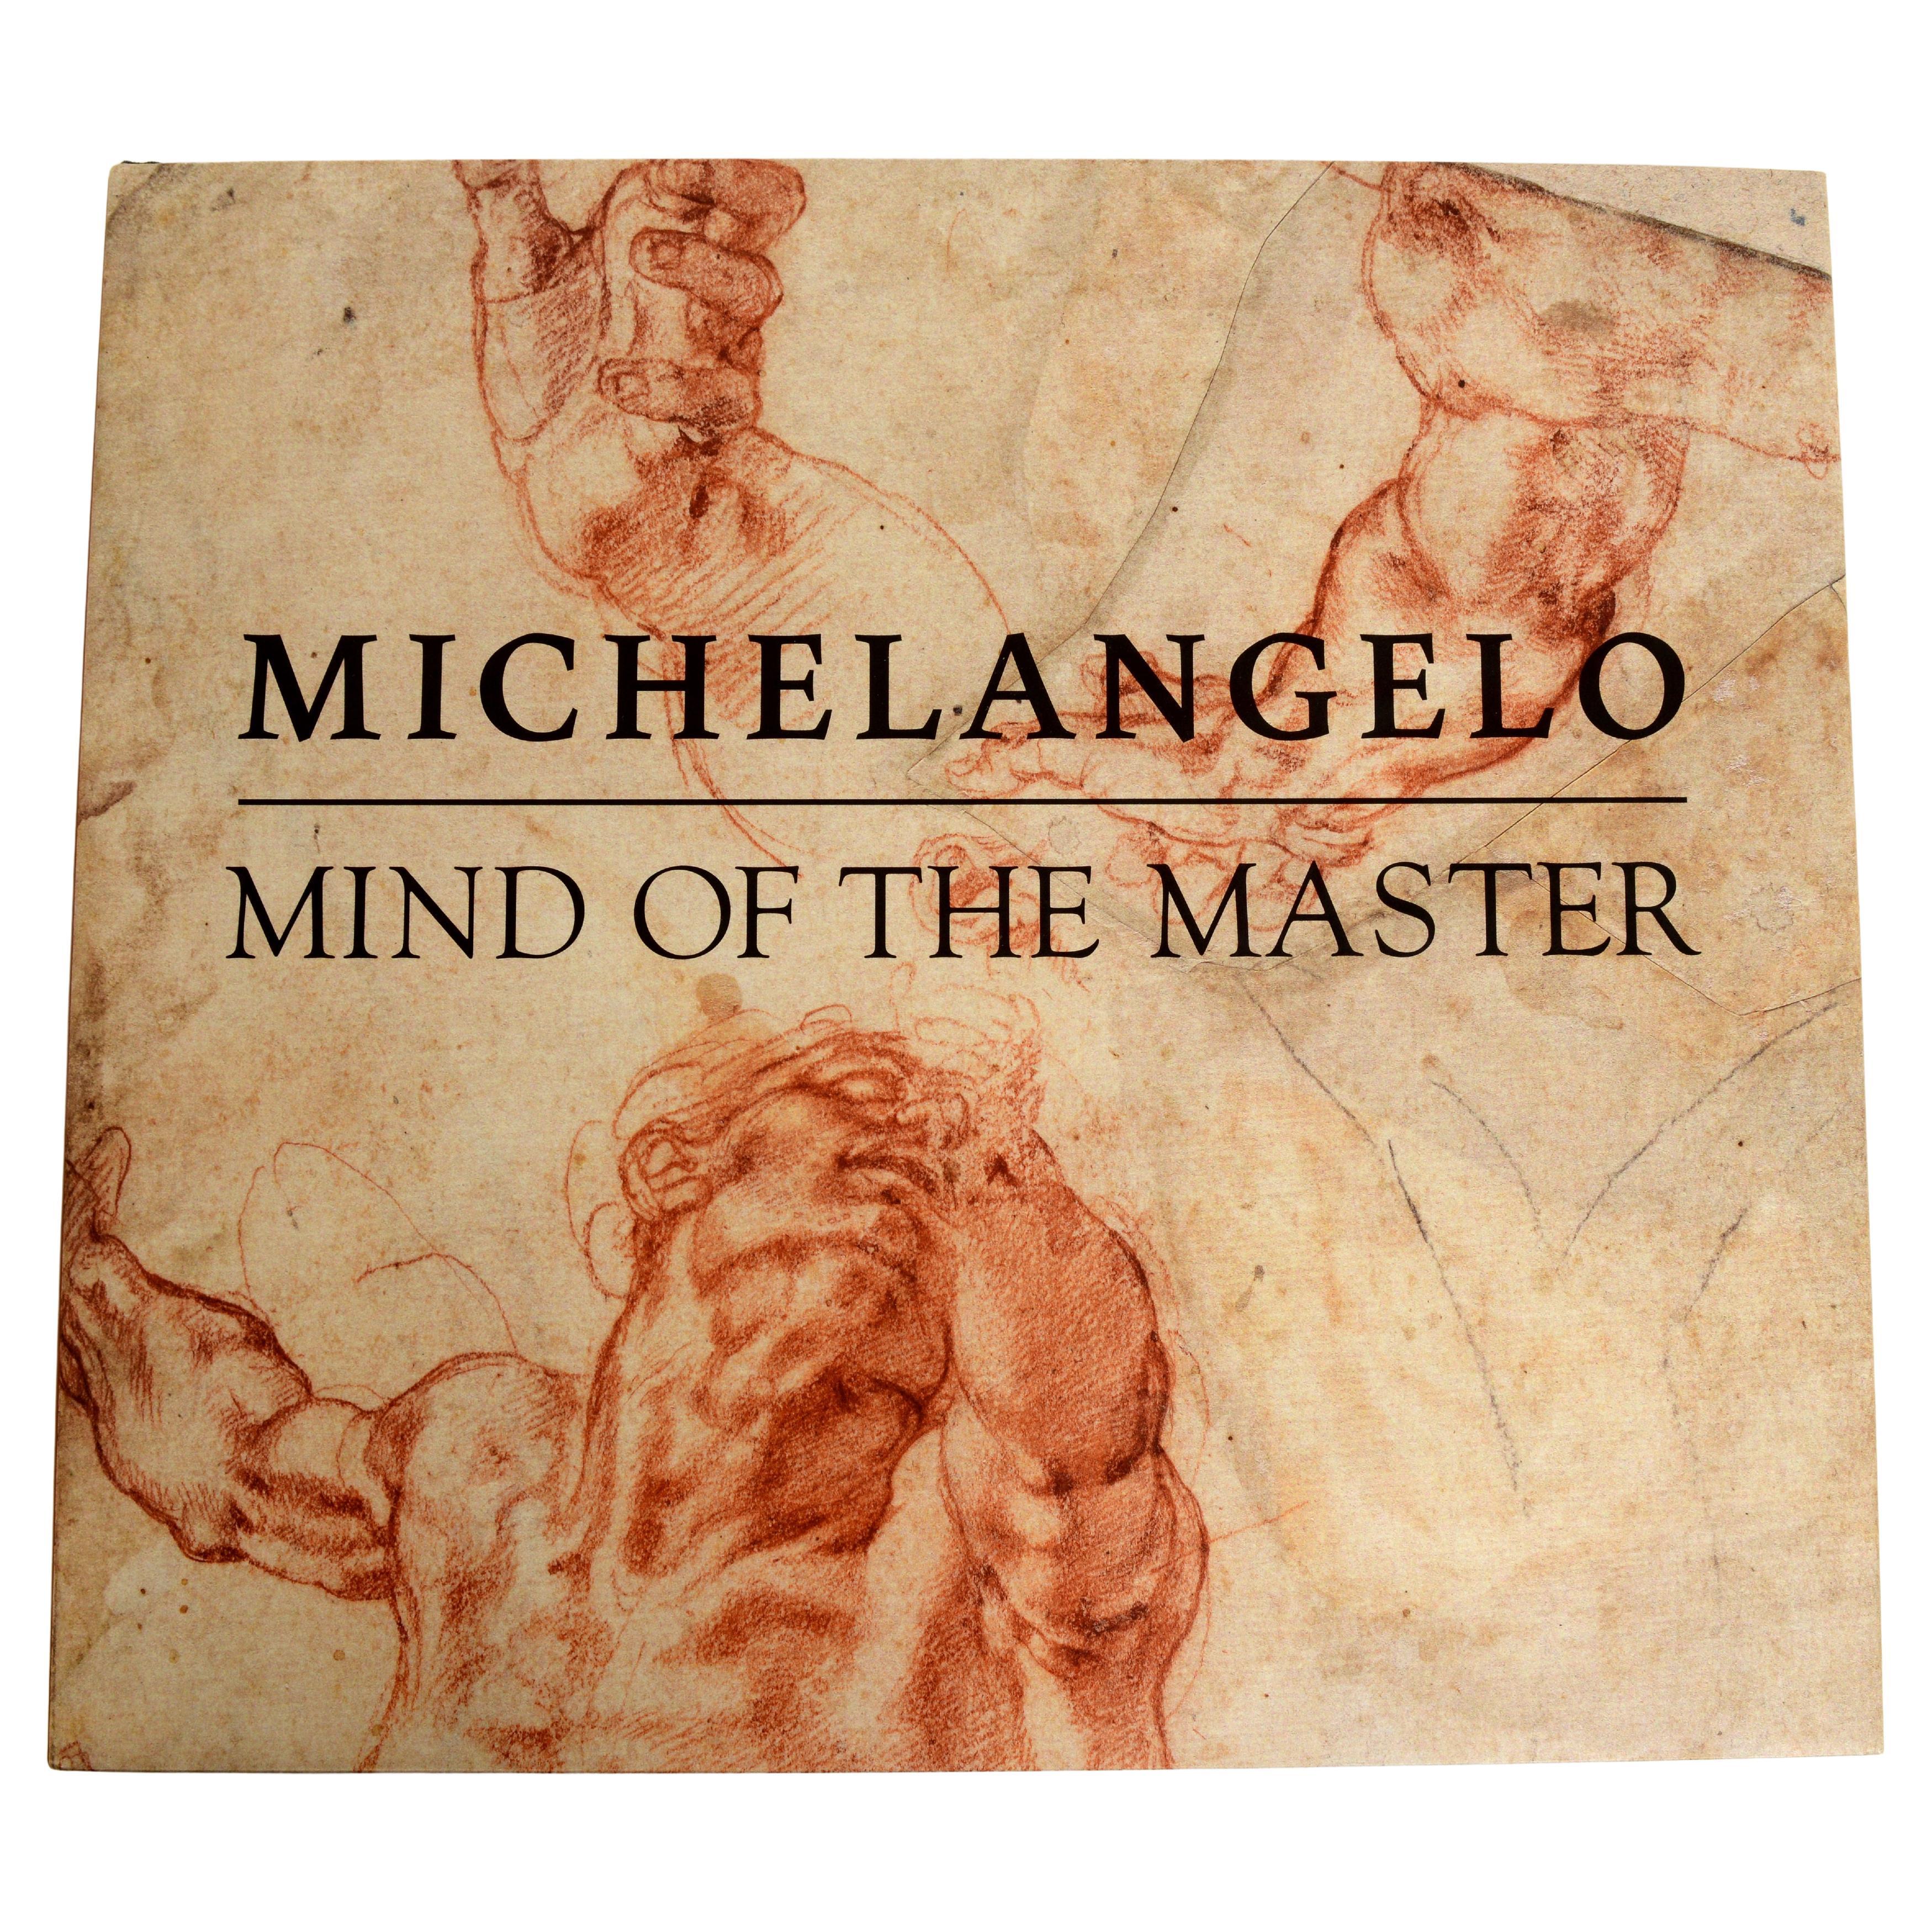 Michelangelo Mind of the Master by Emily J Peters 1st Ed